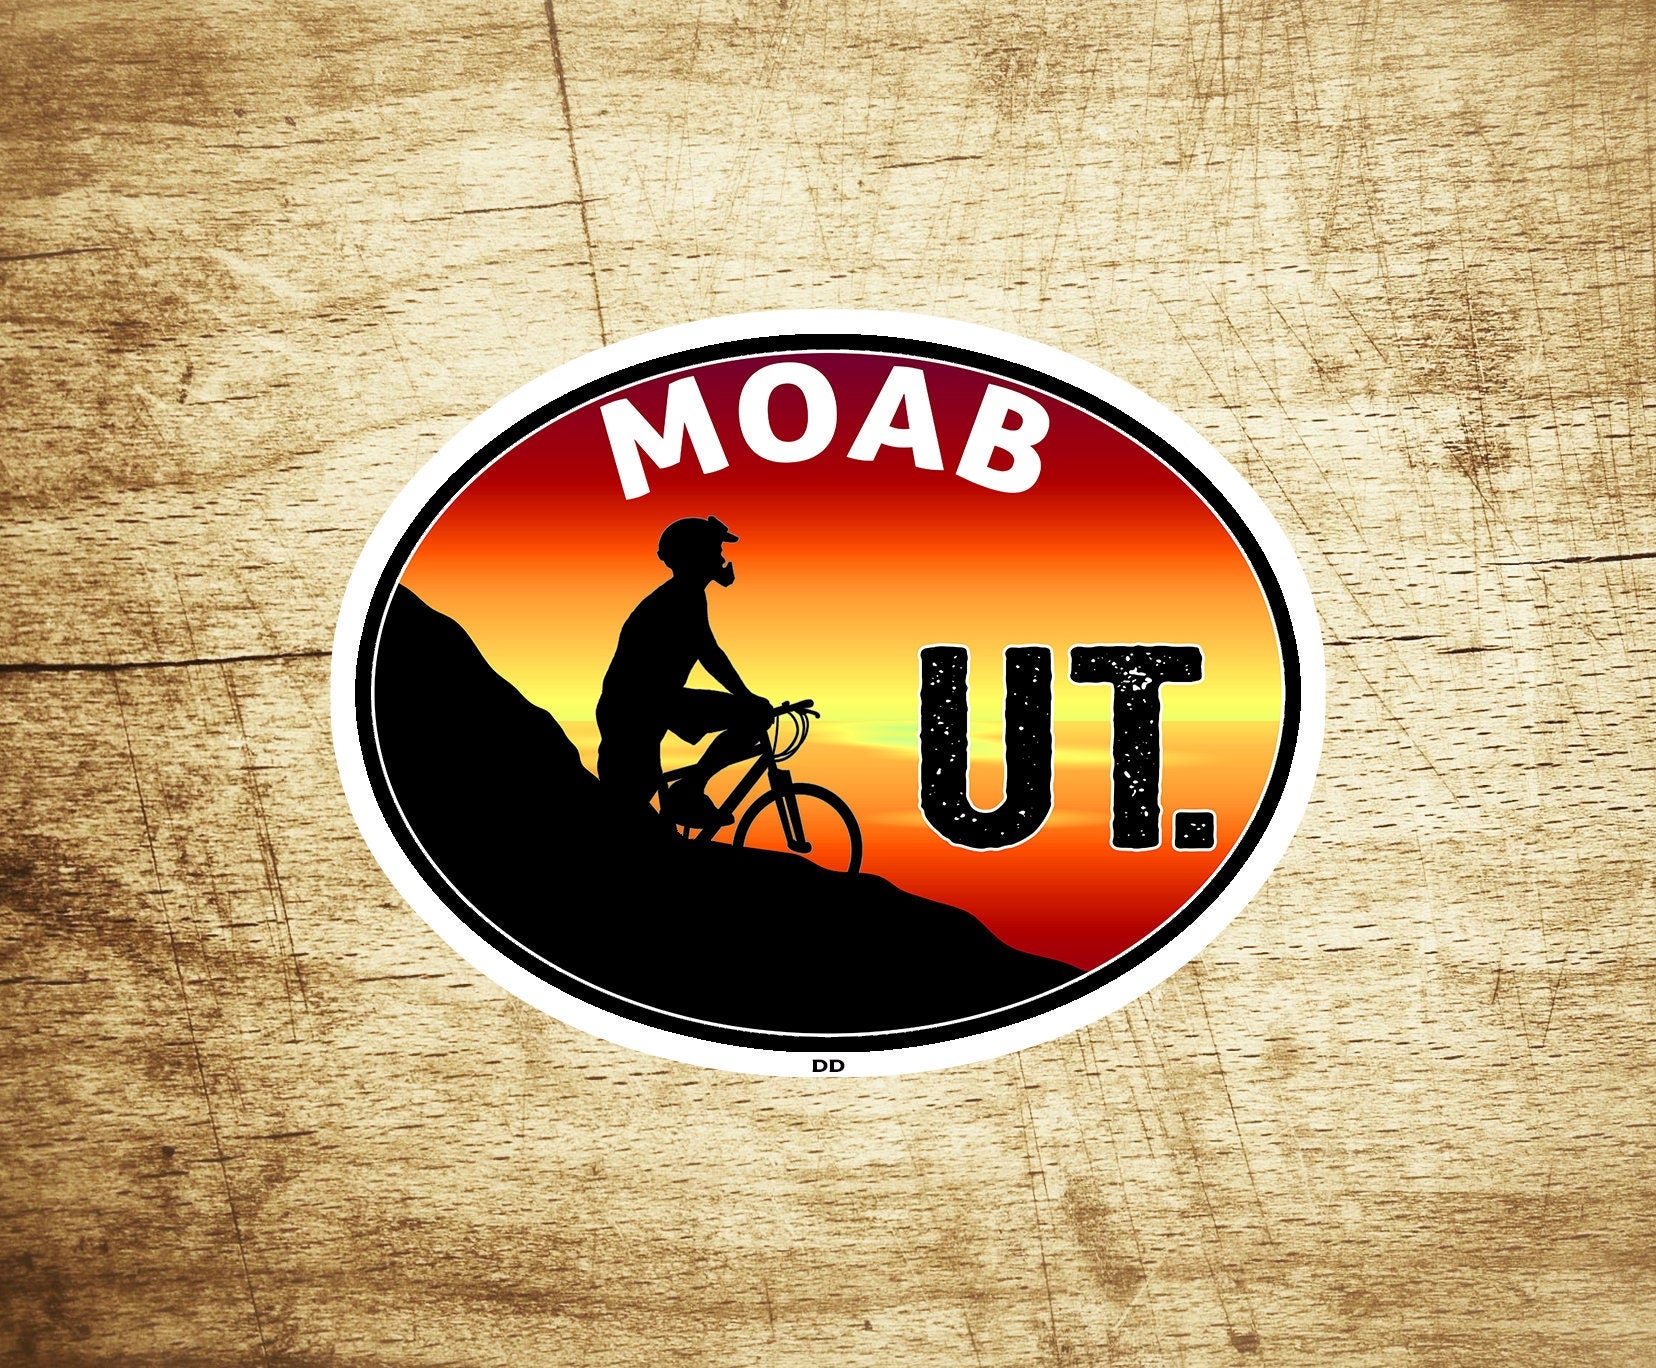 Moab Utah Arches Canyonlands Decal 3 5/8" x 2 3/4" Sticker National Park Mountain Bike